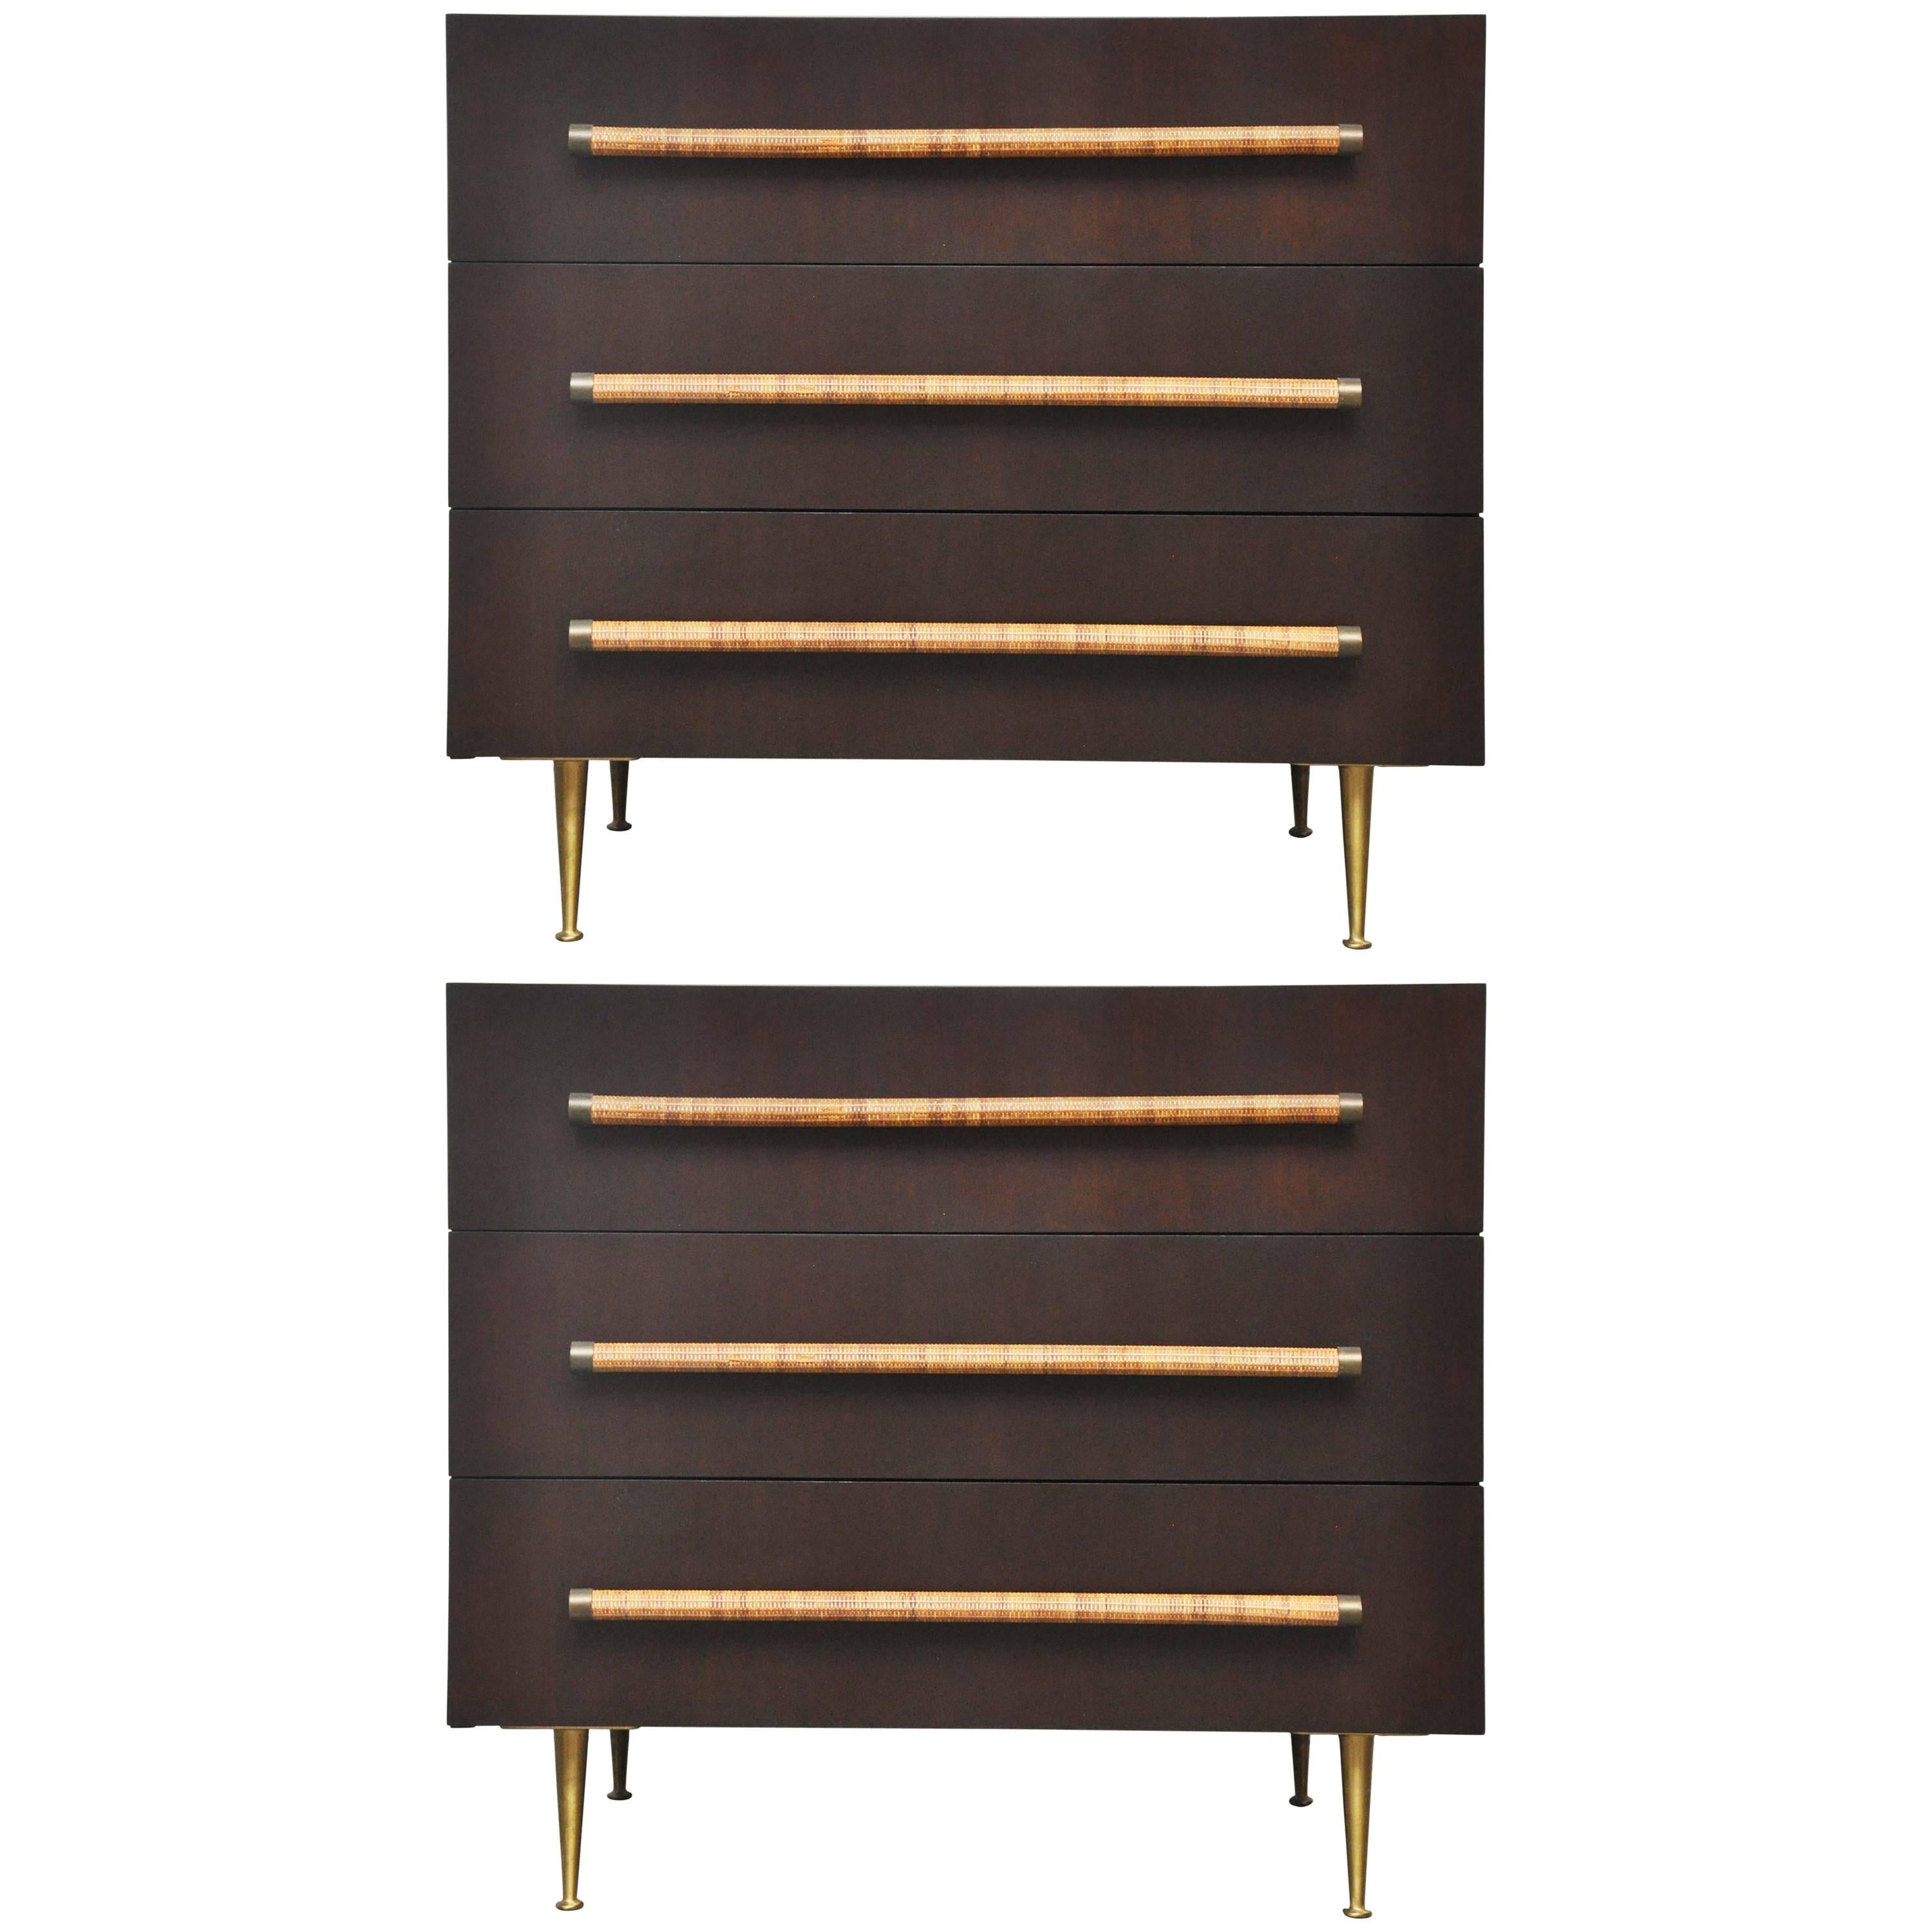 Rare pair of three-drawer chests by T.H. Robsjohn-Gibbings. Refinished espresso tone cases with brass legs and details, cane wrapped pulls. Classic beauties, circa 1950s.